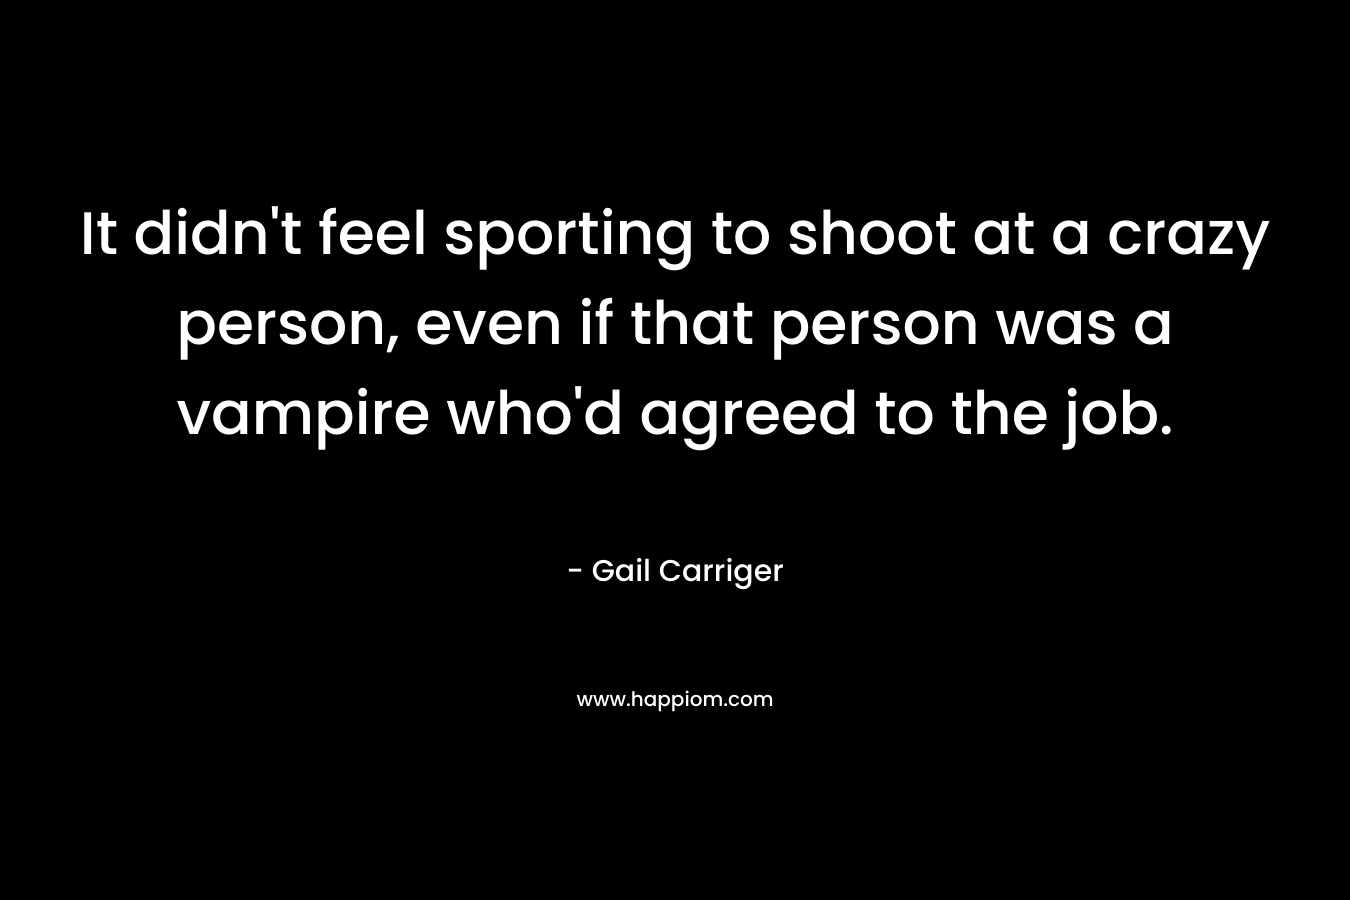 It didn’t feel sporting to shoot at a crazy person, even if that person was a vampire who’d agreed to the job. – Gail Carriger